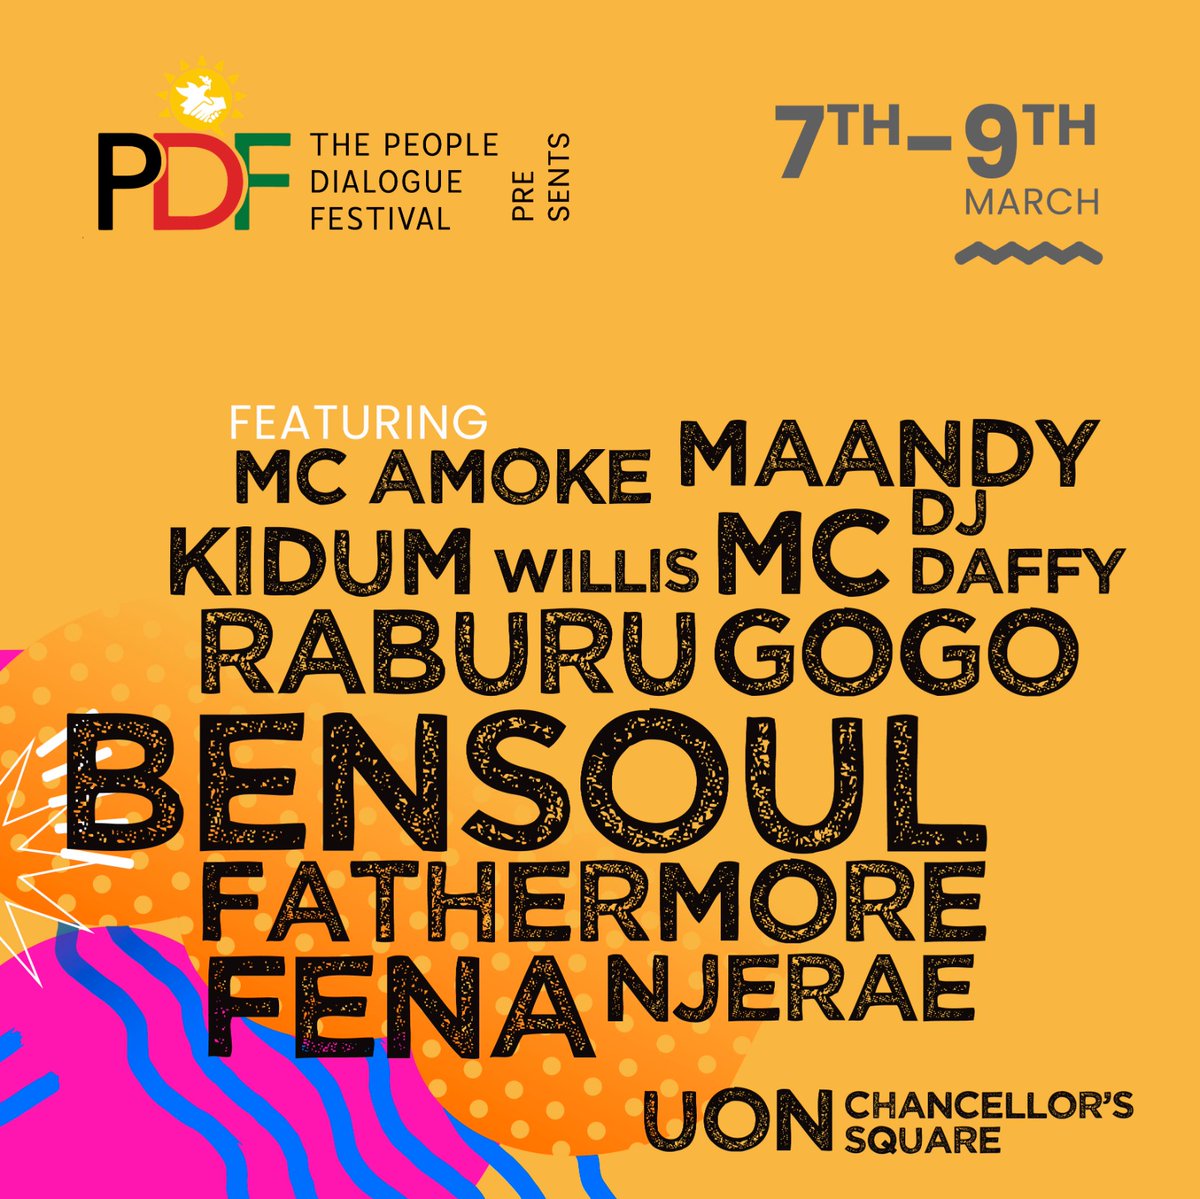 Cool event happening at UON grounds tomorrow @thePDFestival #FormNiDialogue 🔥🇰🇪